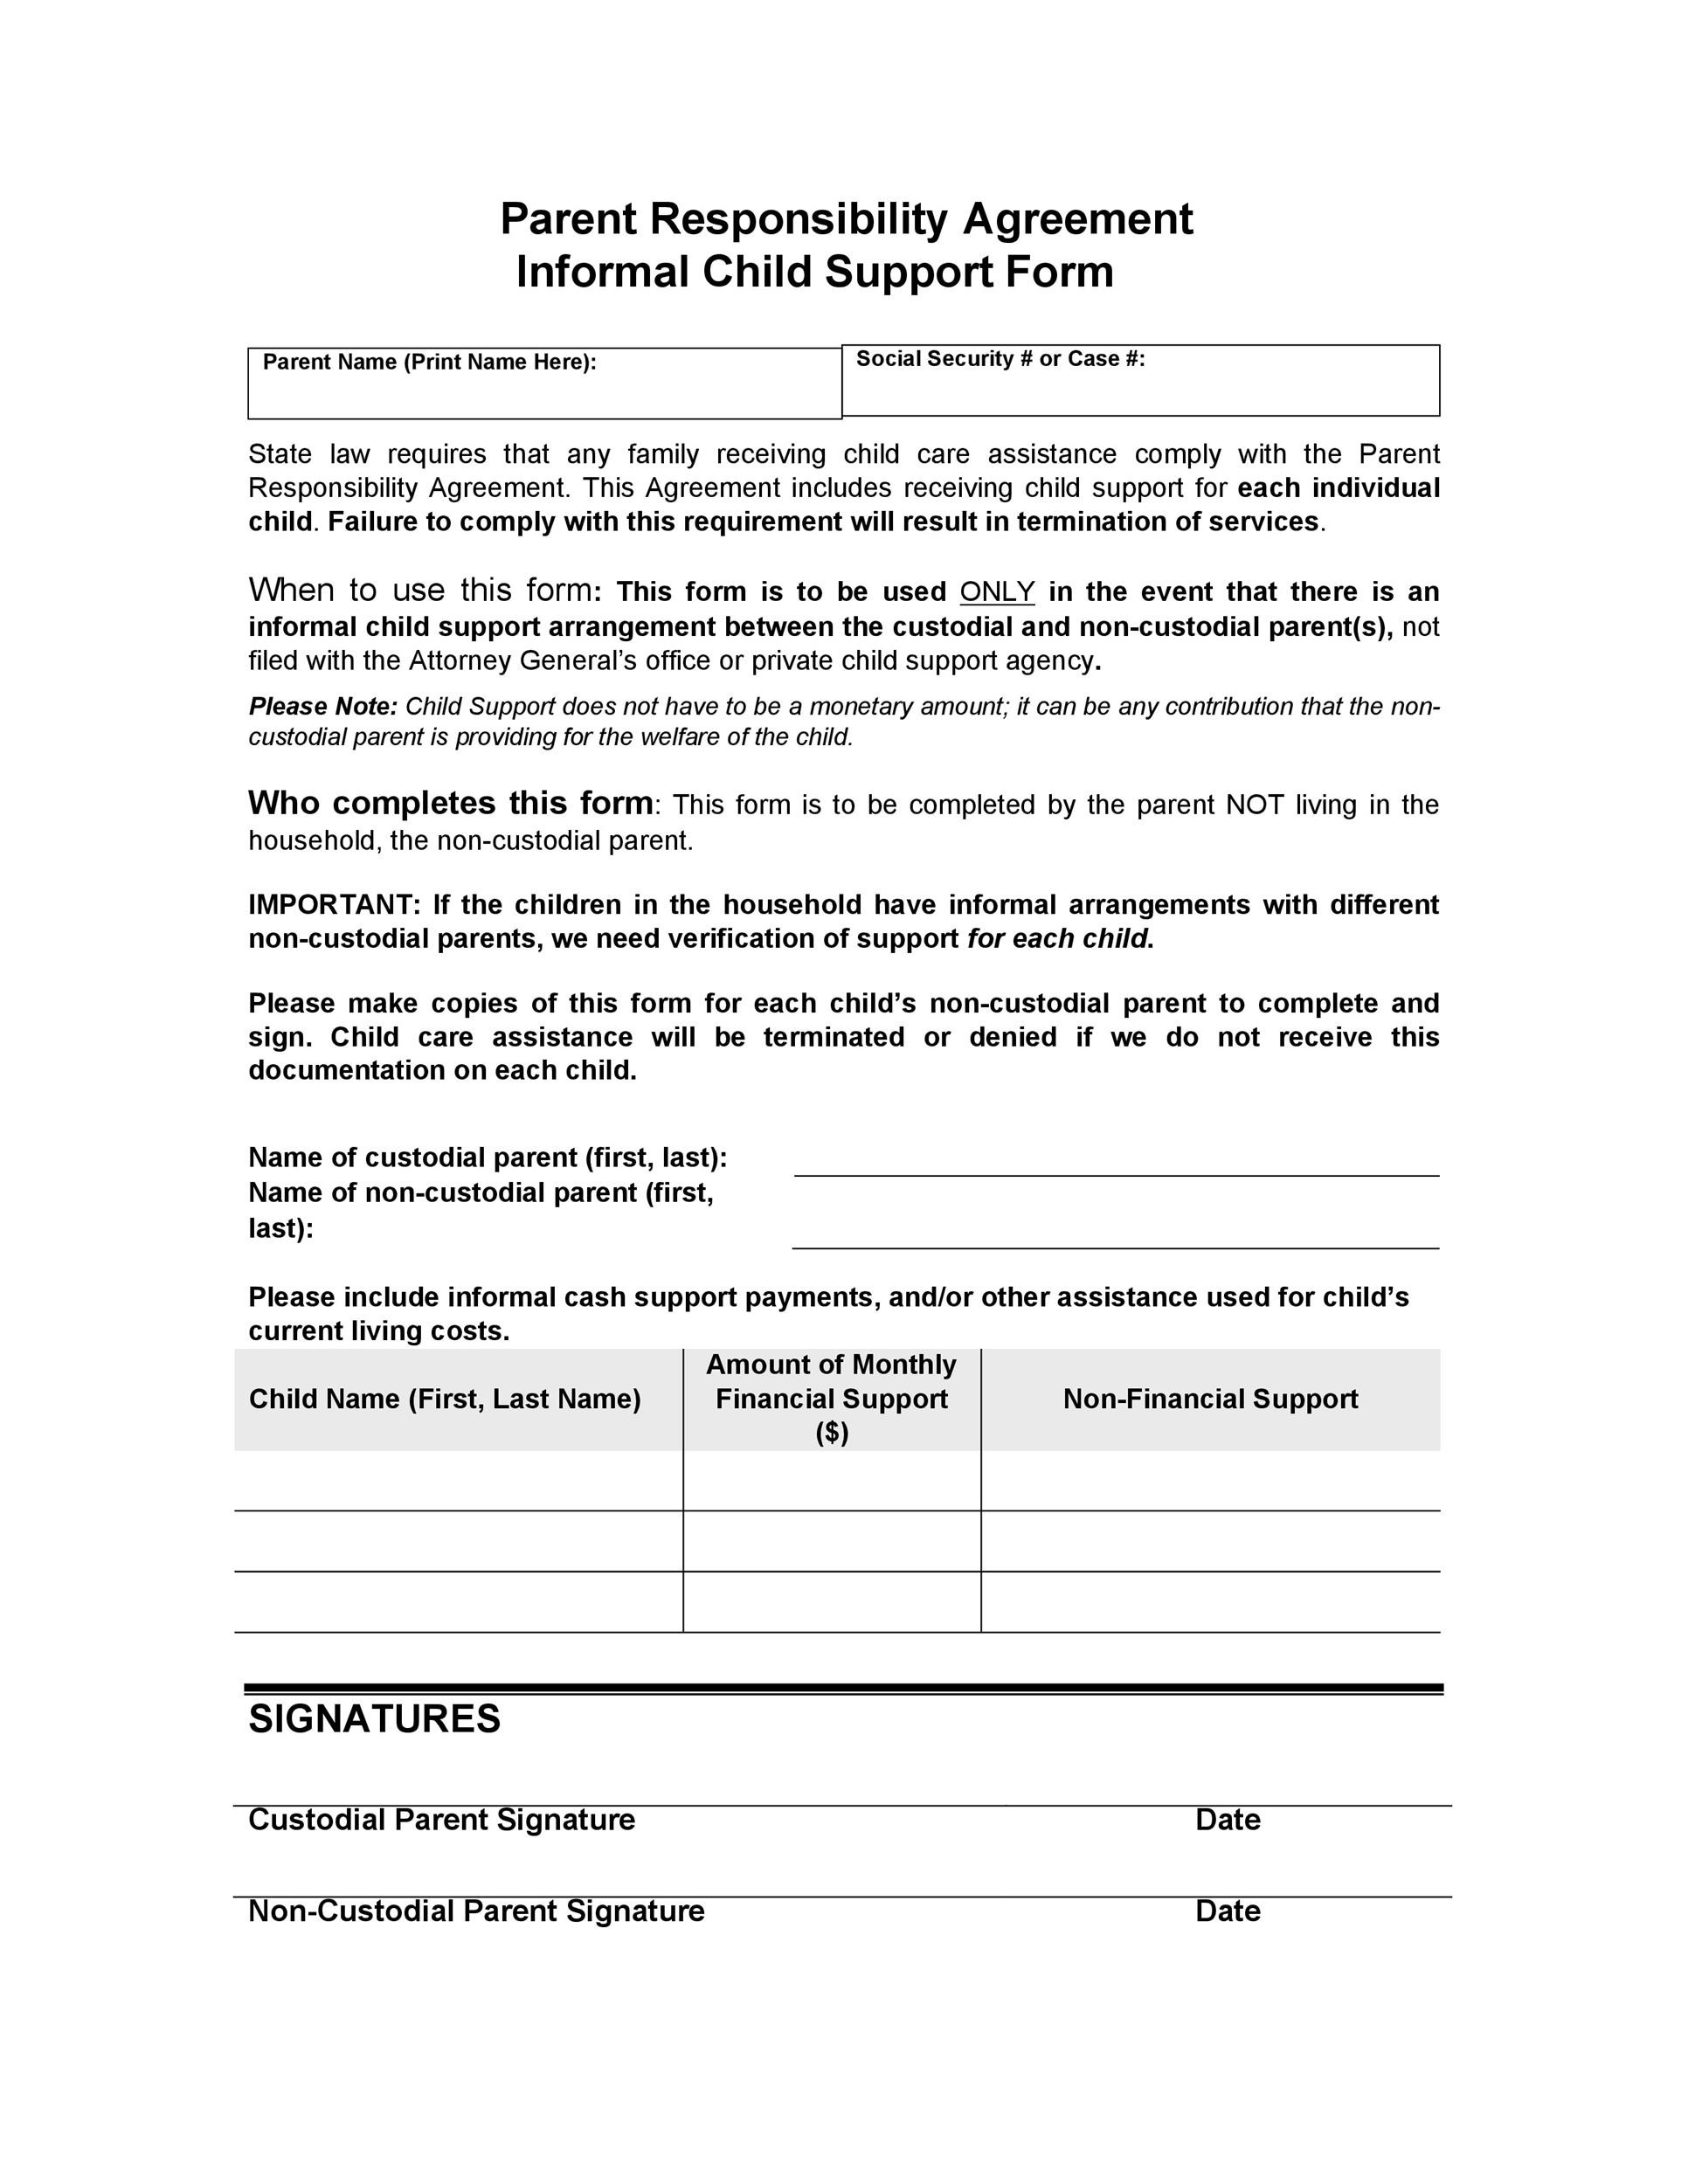 child-support-agreement-template-pdf-tutore-org-master-of-documents